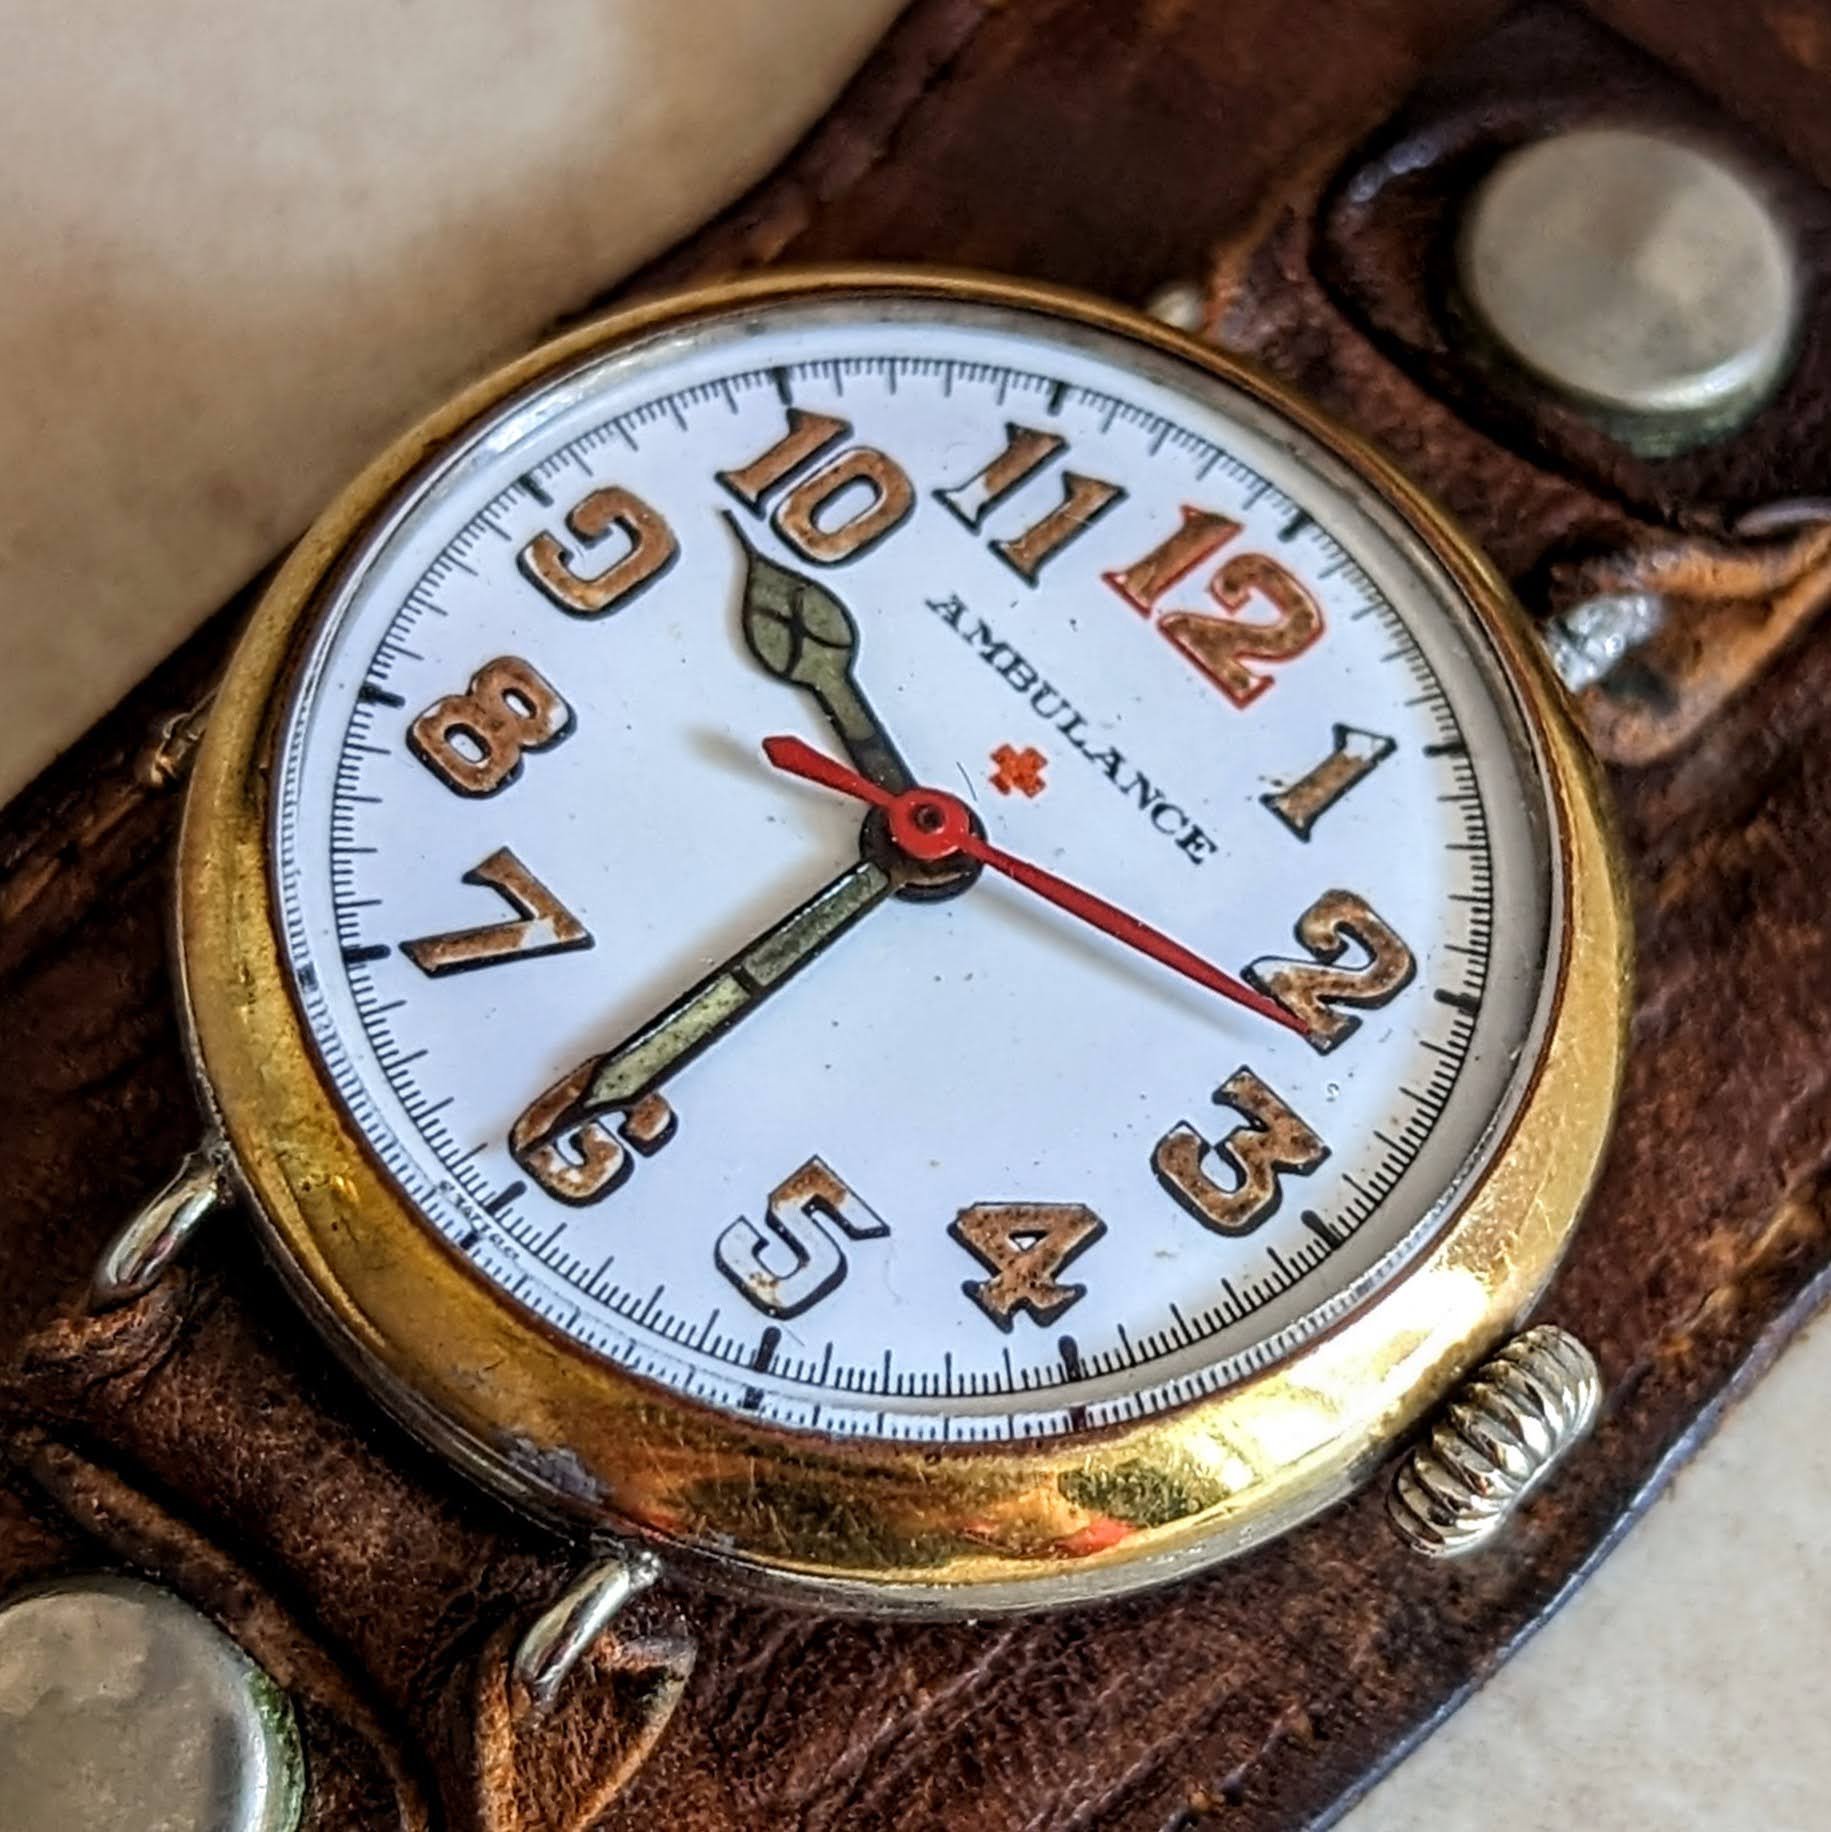 AMBULANCE Red Cross WWI Doctor's by Marvin – SECOND HAND HOROLOGY